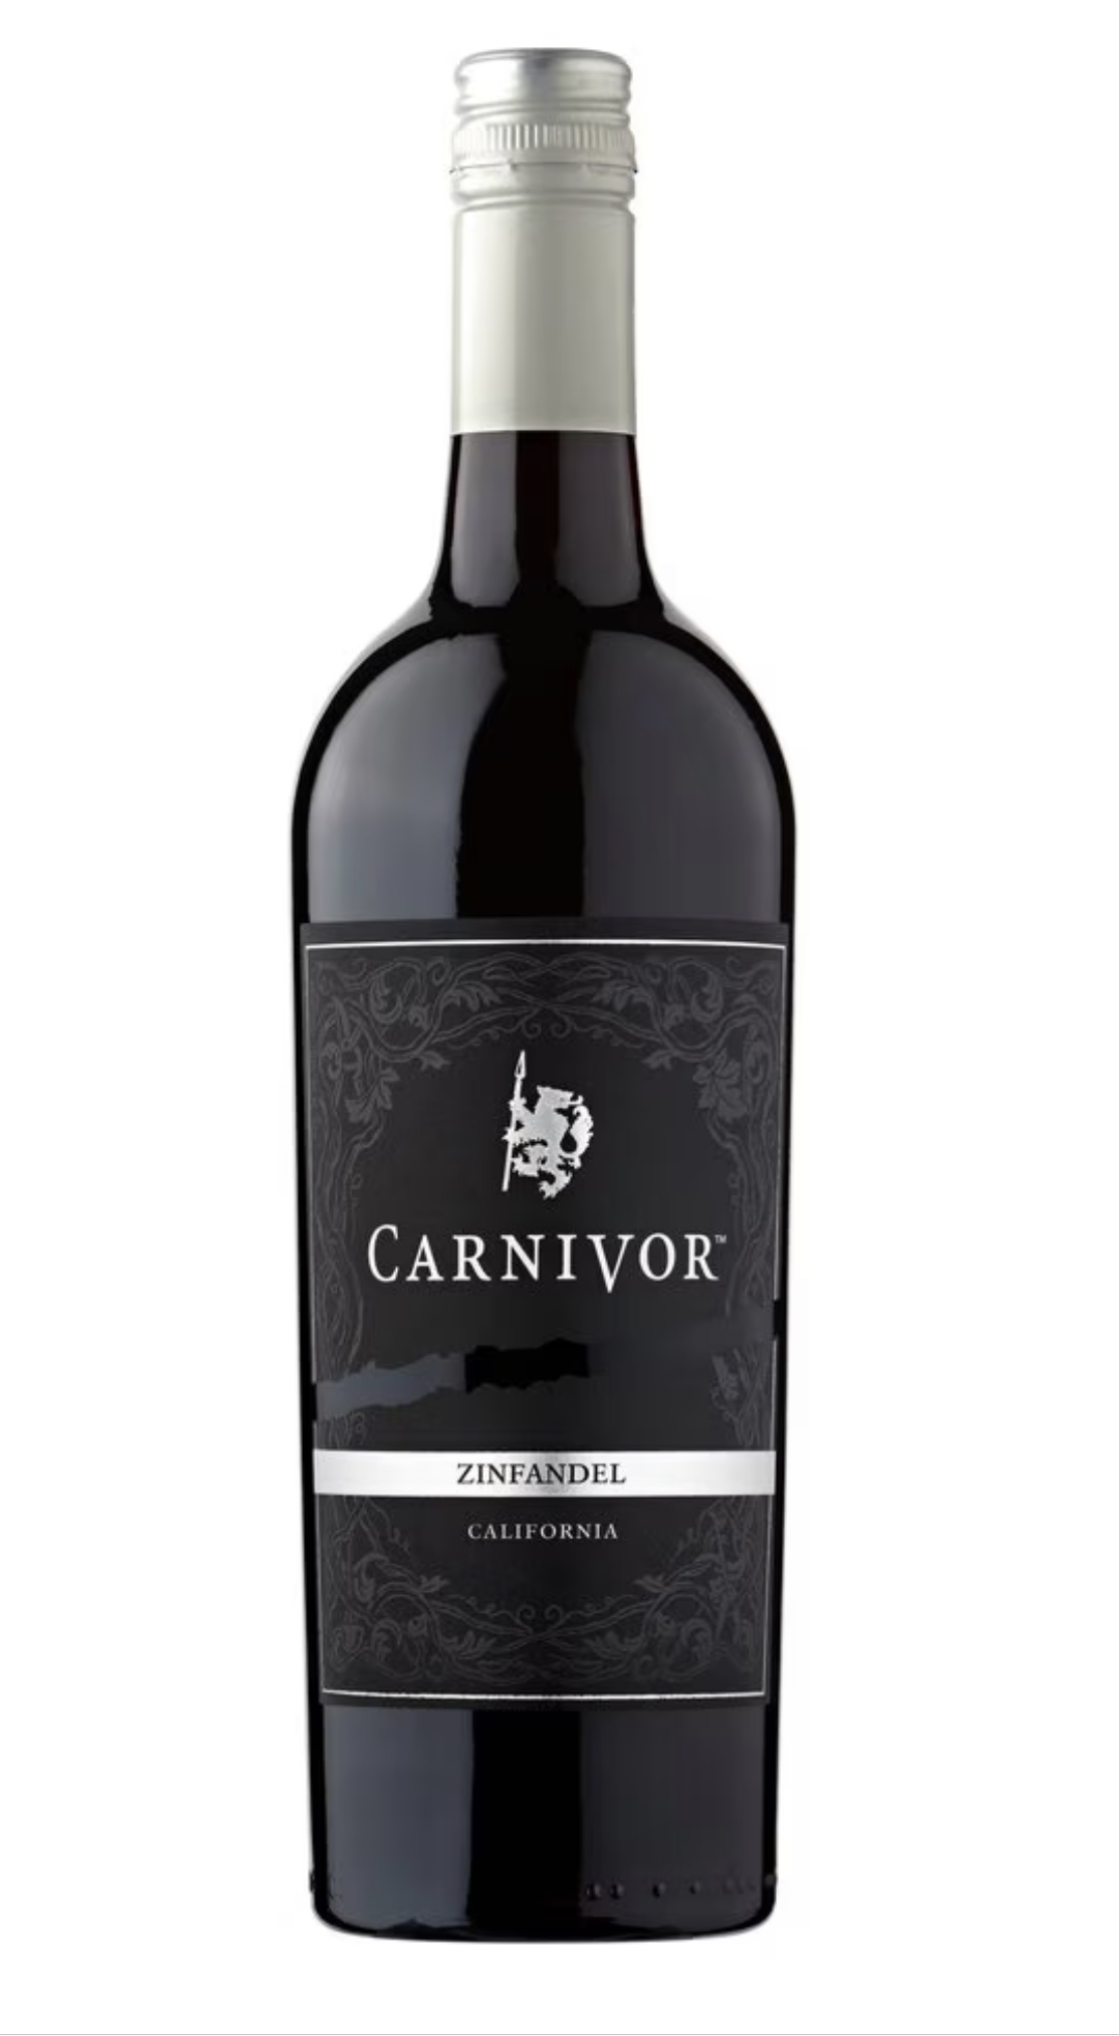 Pistonheads - The image shows a single bottle of wine with a label that reads "Carnivor." The label also has the word "Zinfandel" beneath it. The style of the image is that of a product photograph, typically used for marketing or retail purposes. The wine bottle is the central focus of the image and is presented against a plain background to emphasize the item itself. The text on the wine label suggests that this particular bottle may be from a winery named Carnivor and contains Zinfandel wine, which is associated with California wines known for their bold flavors.